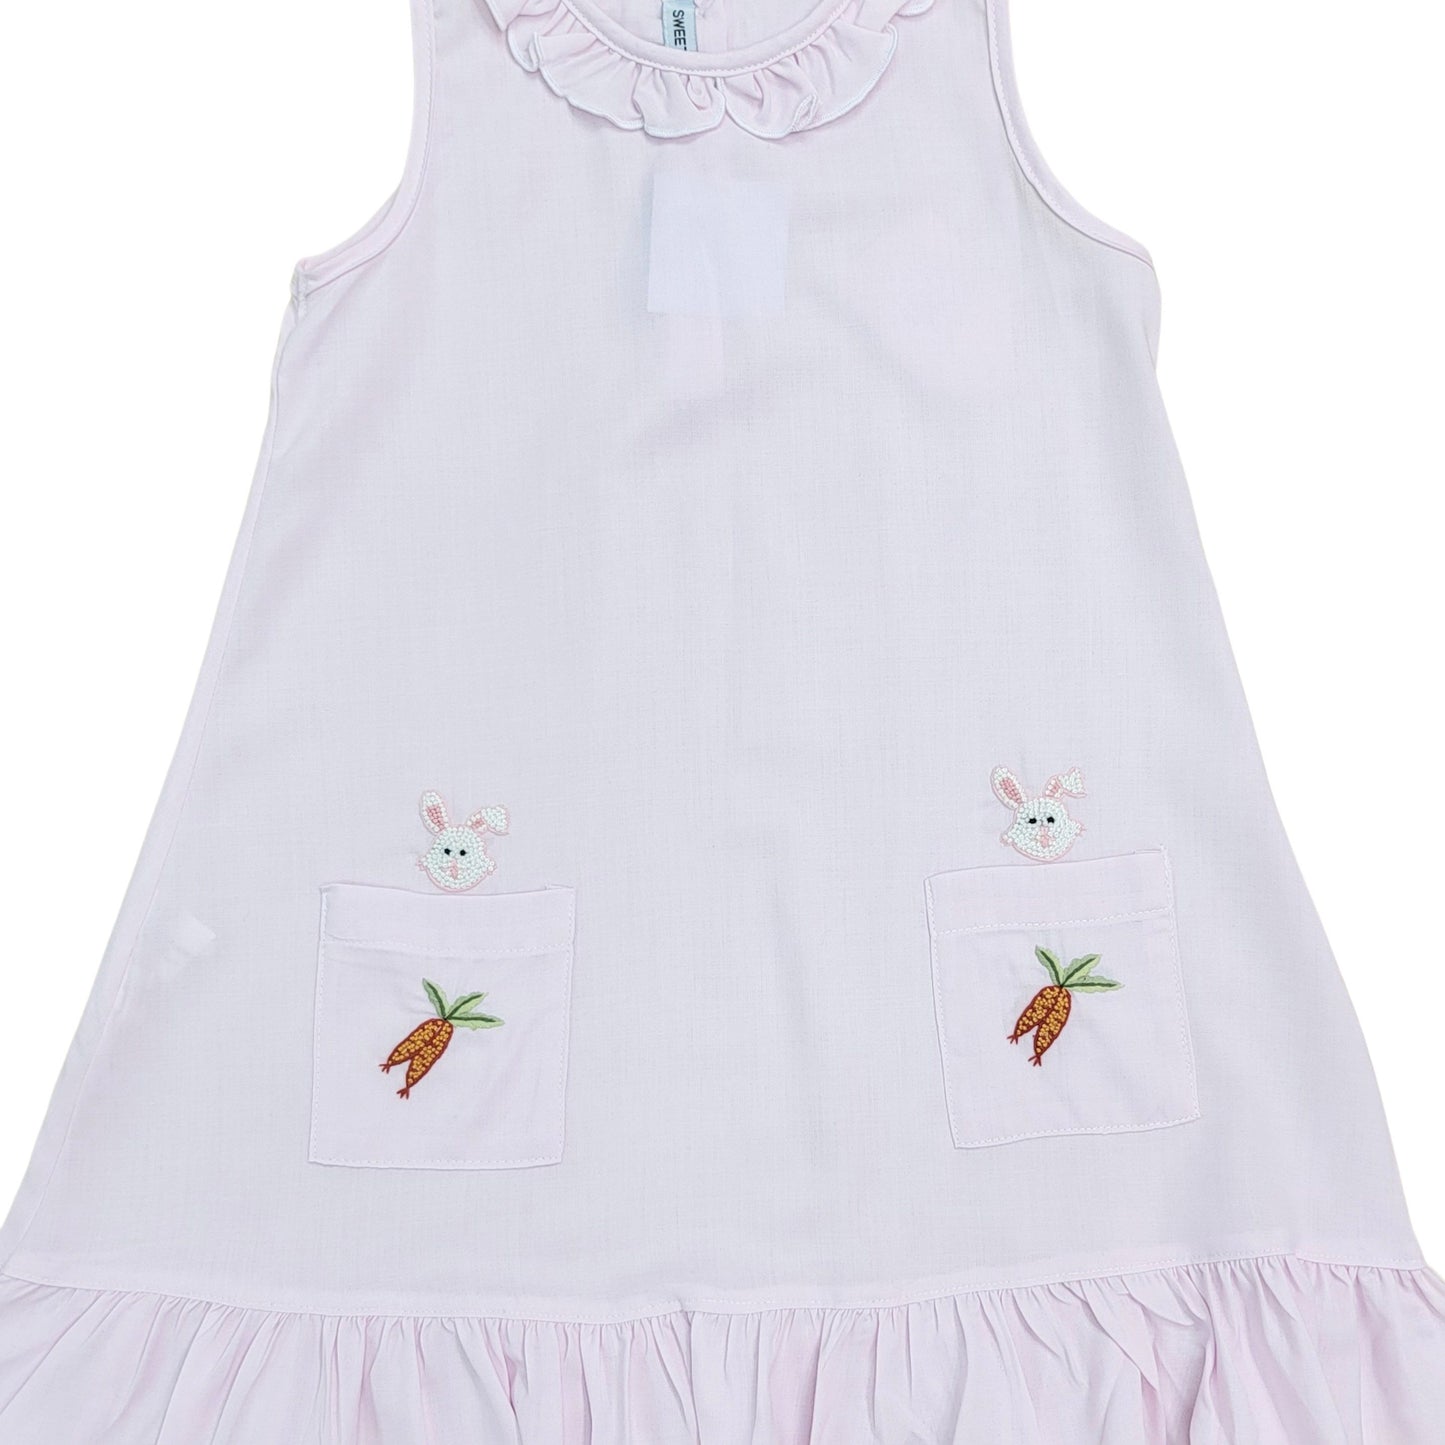 Embroidered Bunny & Carrot Nightgown - Magpies Paducah